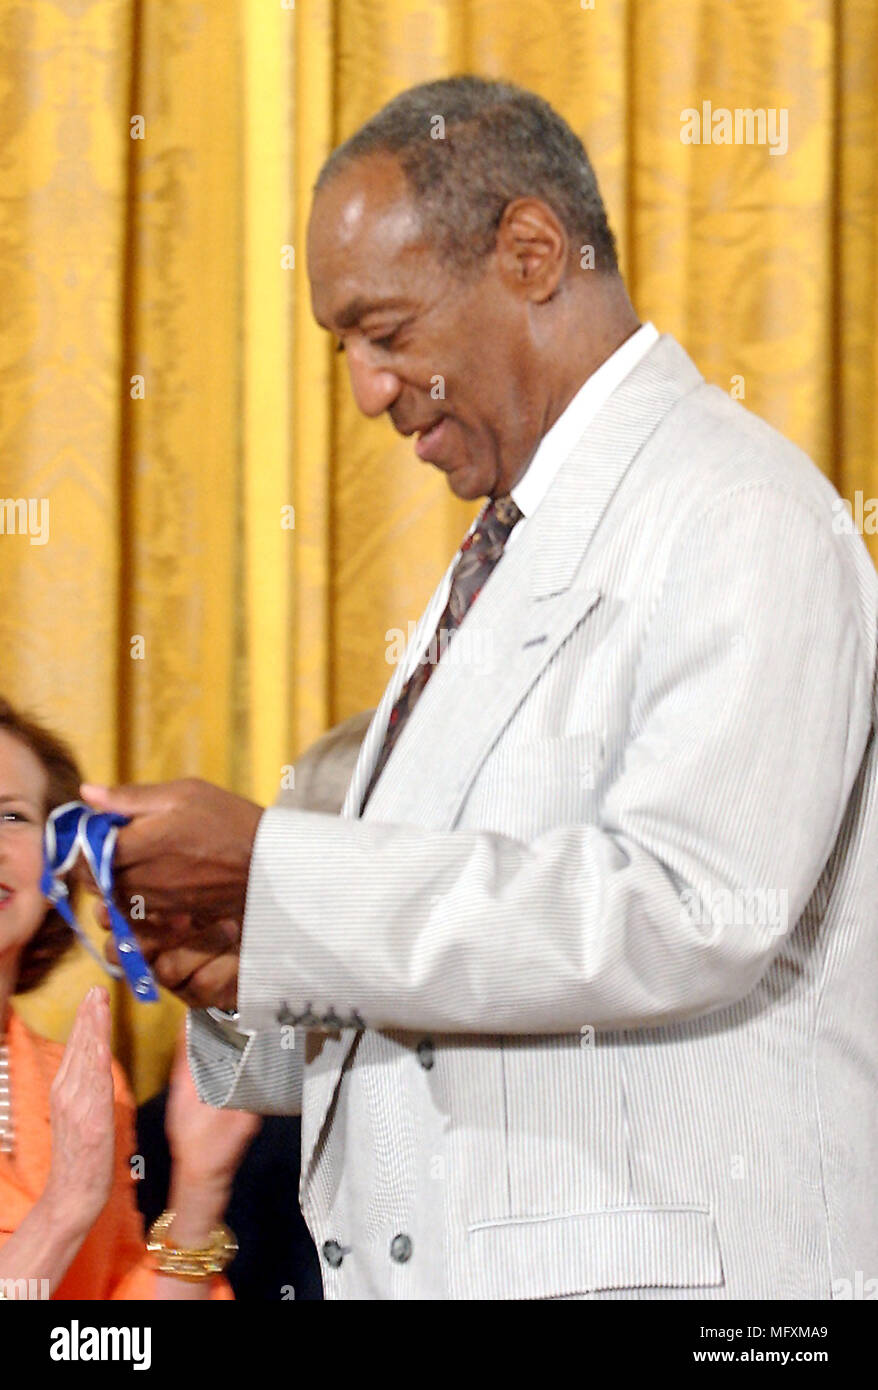 Washington, District of Columbia, USA. 9th July, 2002. Bill Cosby admires his Presidential Medal of Freedom that he received from United States President George W. Bush during a ceremony in the East Room of the White House in Washington, DC on July 9, 2002.Credit: Ron Sachs/CNP Credit: Ron Sachs/CNP/ZUMA Wire/Alamy Live News Stock Photo